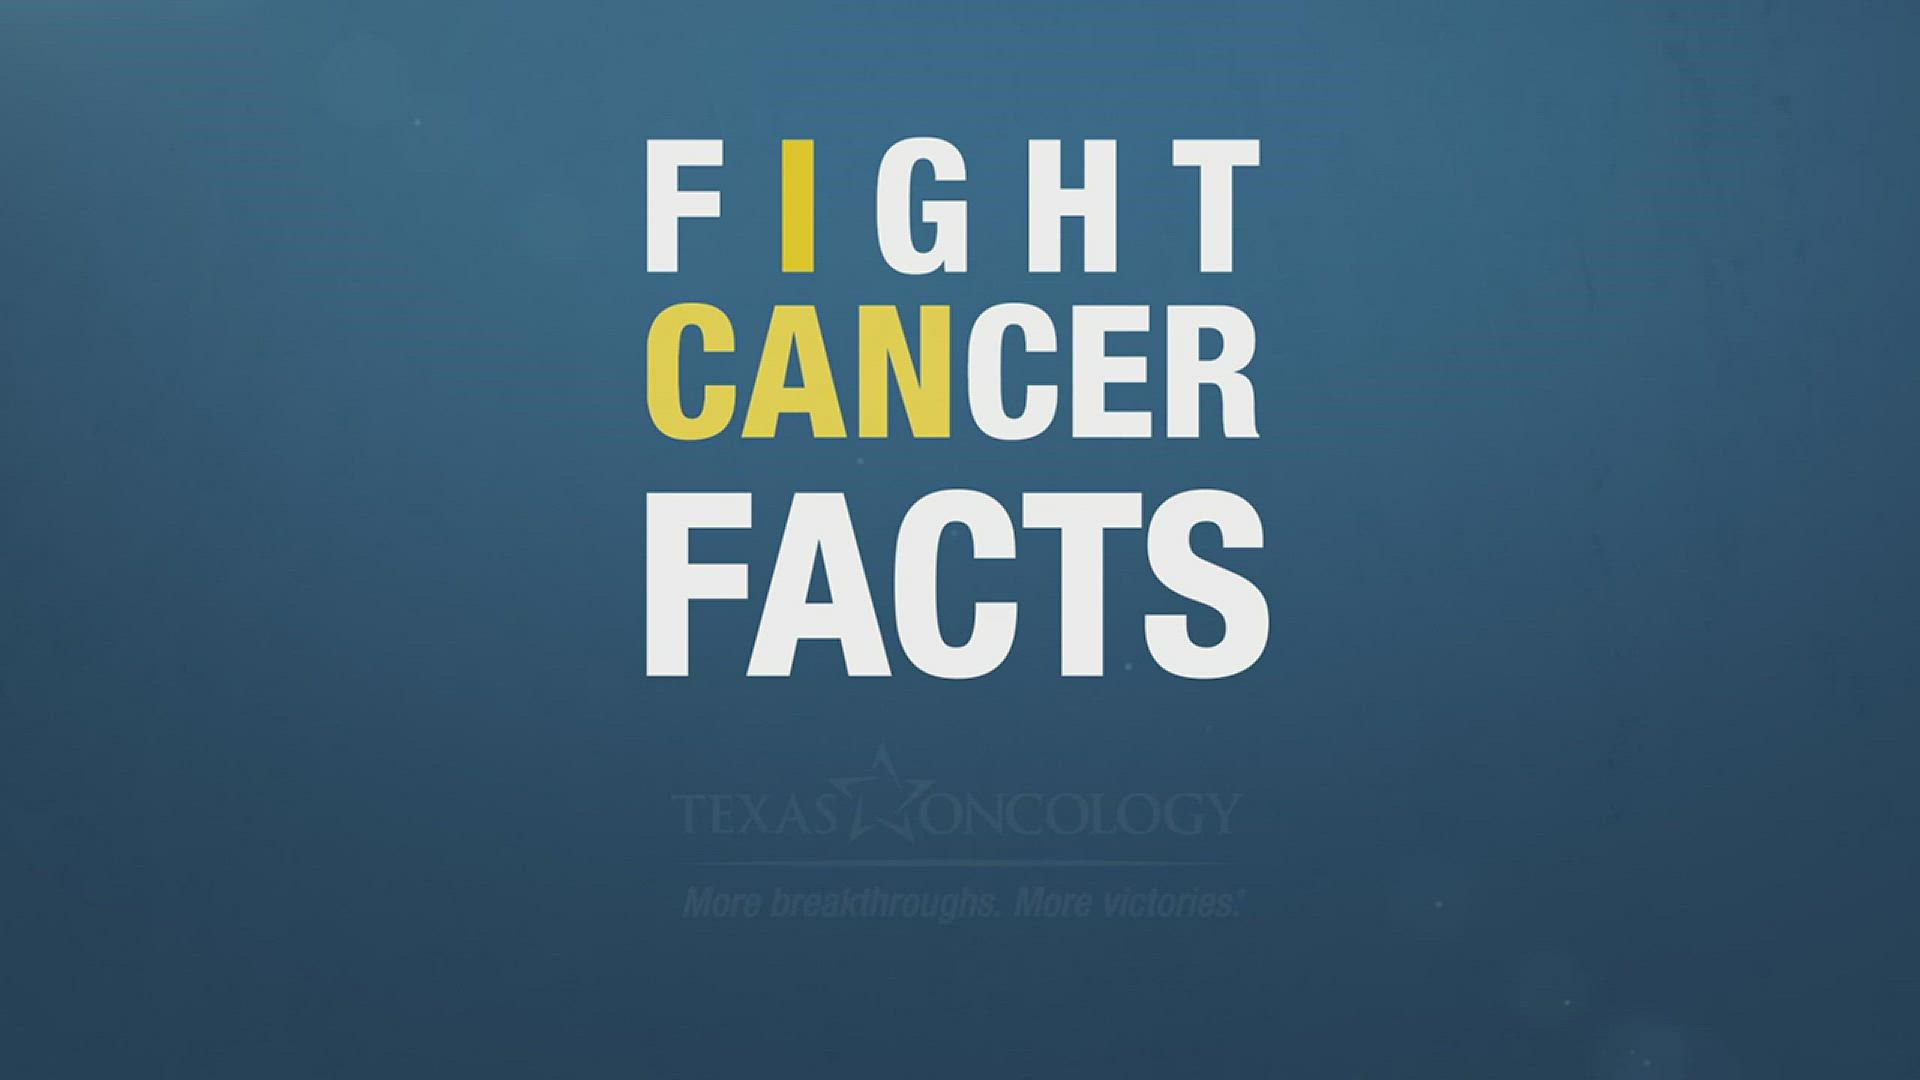 Local Texas Oncology doctor shares the importance of annual check-ups and cancer screening.